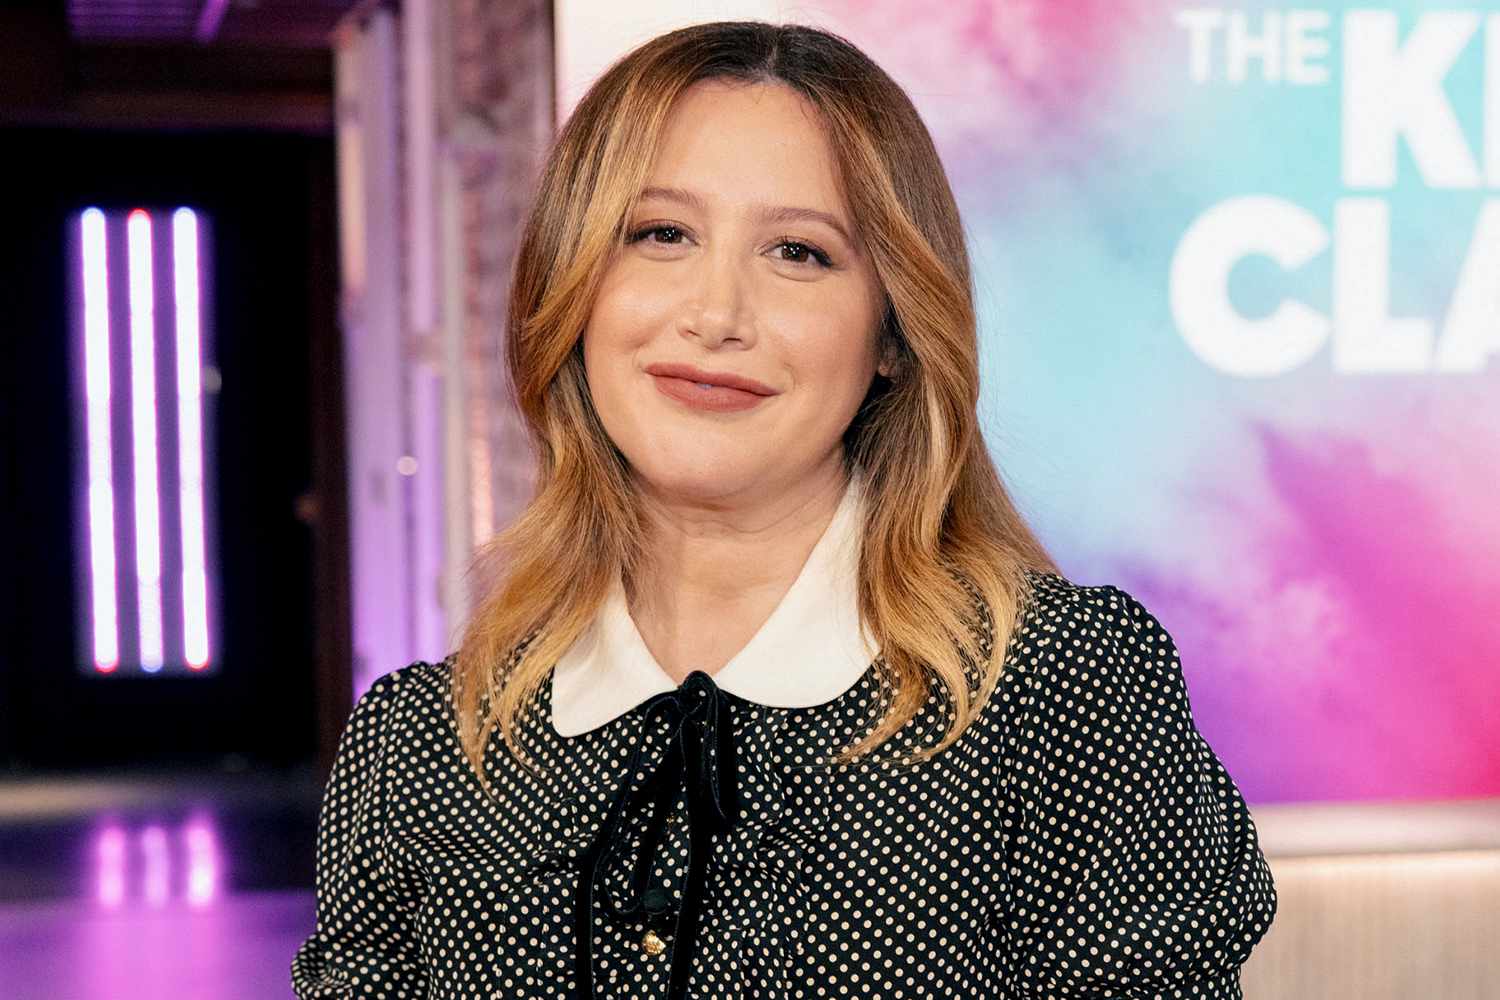 Pregnant Ashley Tisdale Shares Adorable Video of Daughter at “Phineas and Ferb ”Recording Session: ‘Awesome’